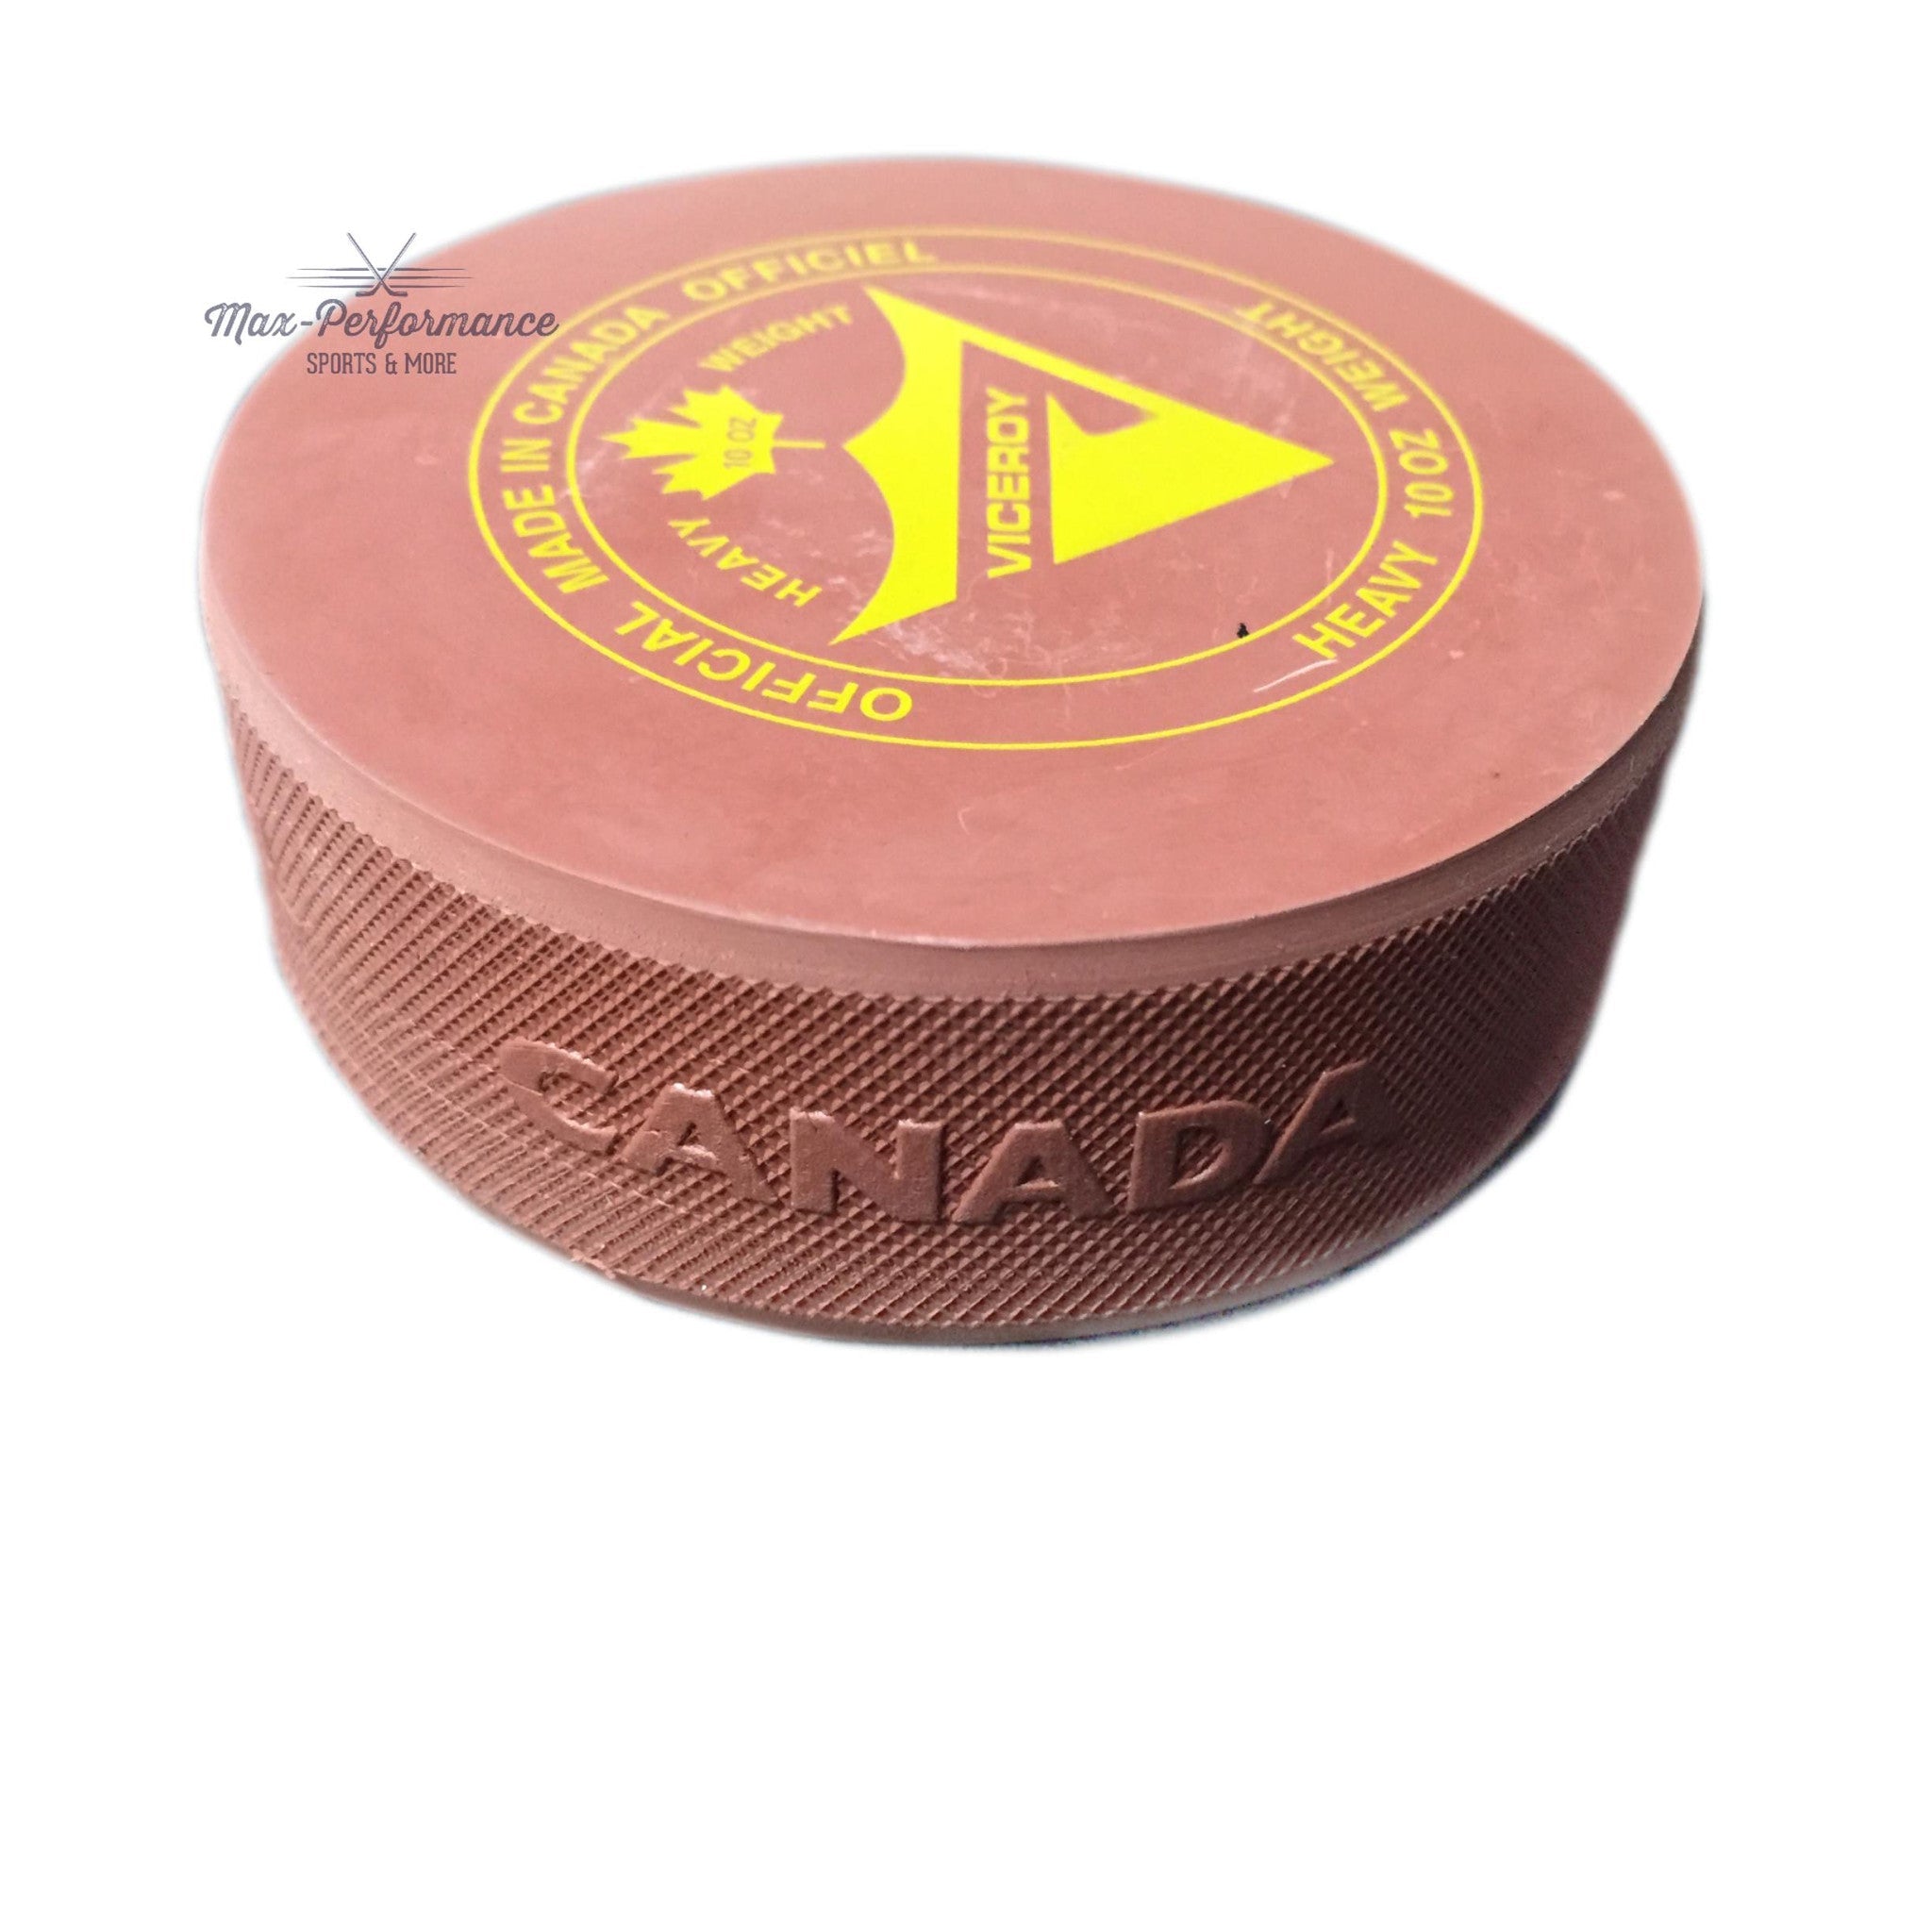 Official Pro Merch Pittsburgh Penguins Hockey Puck made by Viceroy